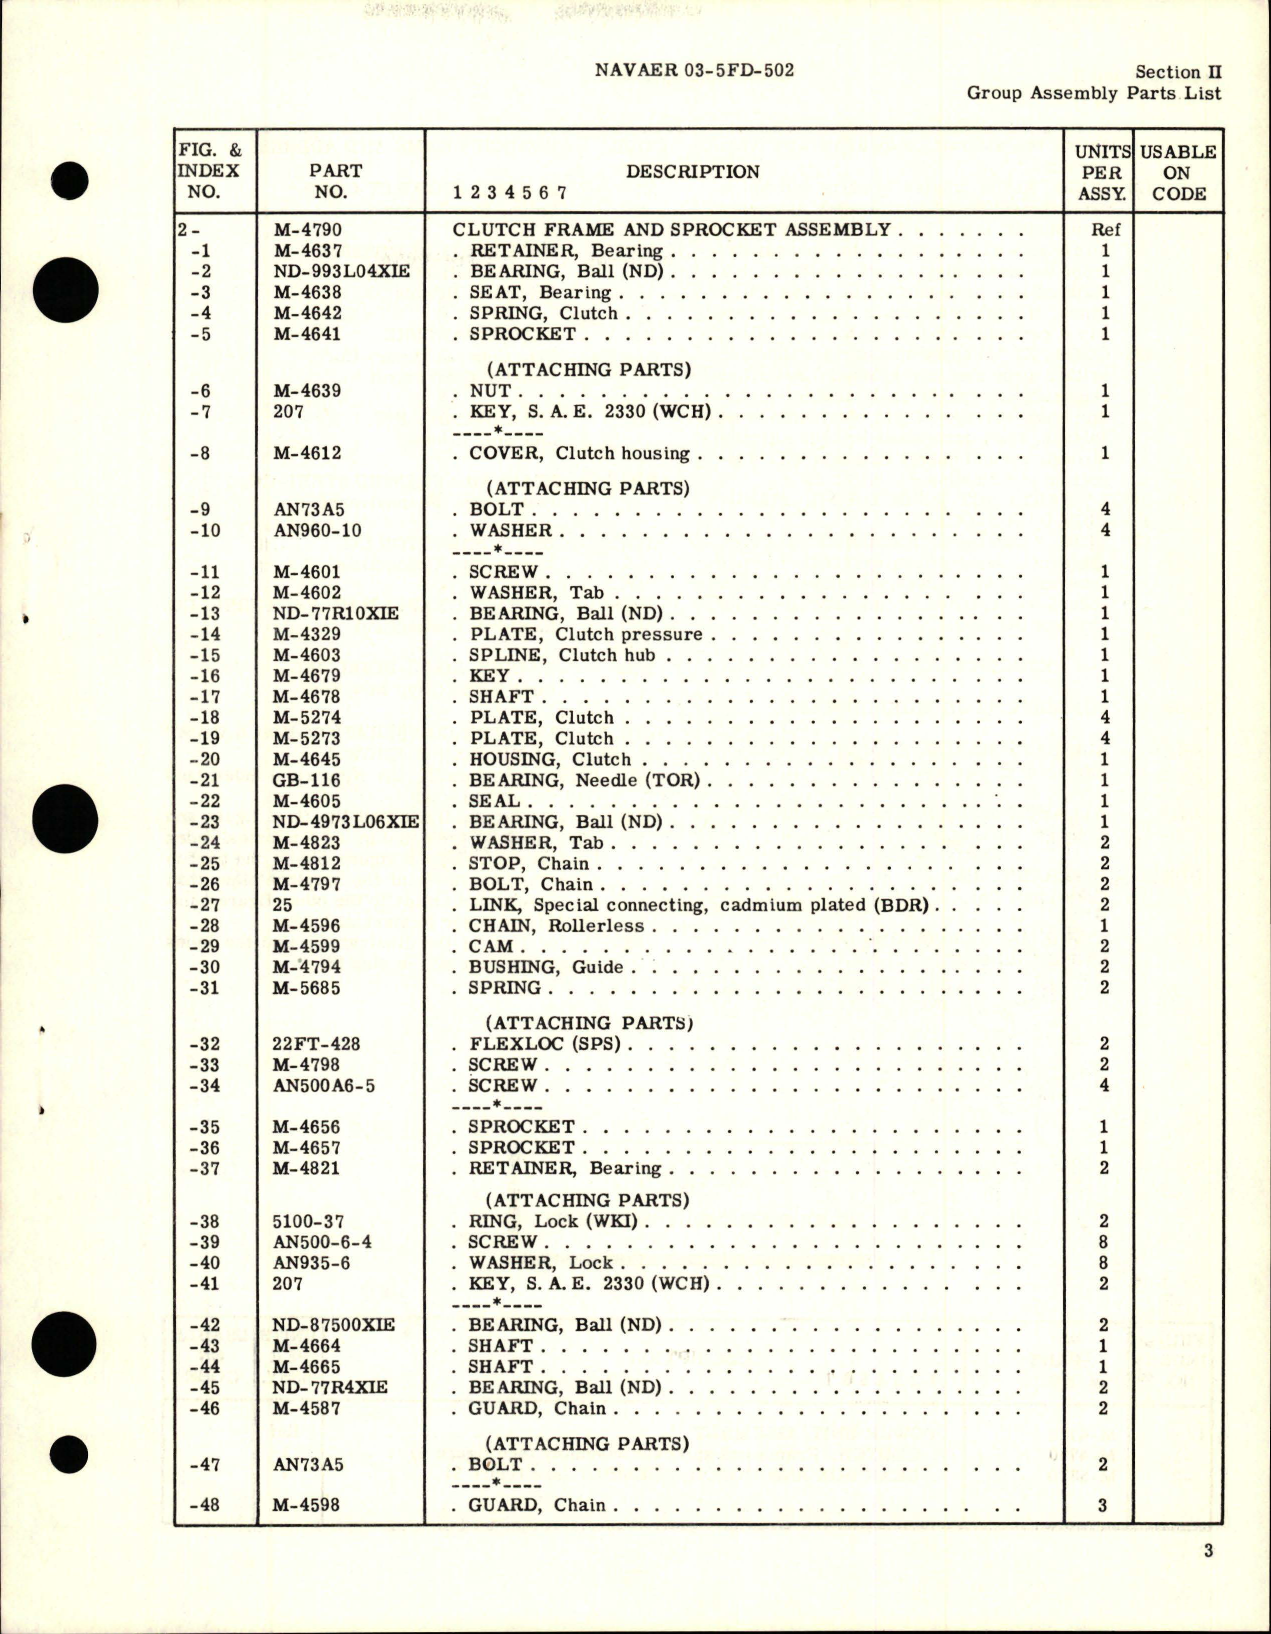 Sample page 7 from AirCorps Library document: Illustrated Parts Breakdown for Power Unit System - Part M-4770 